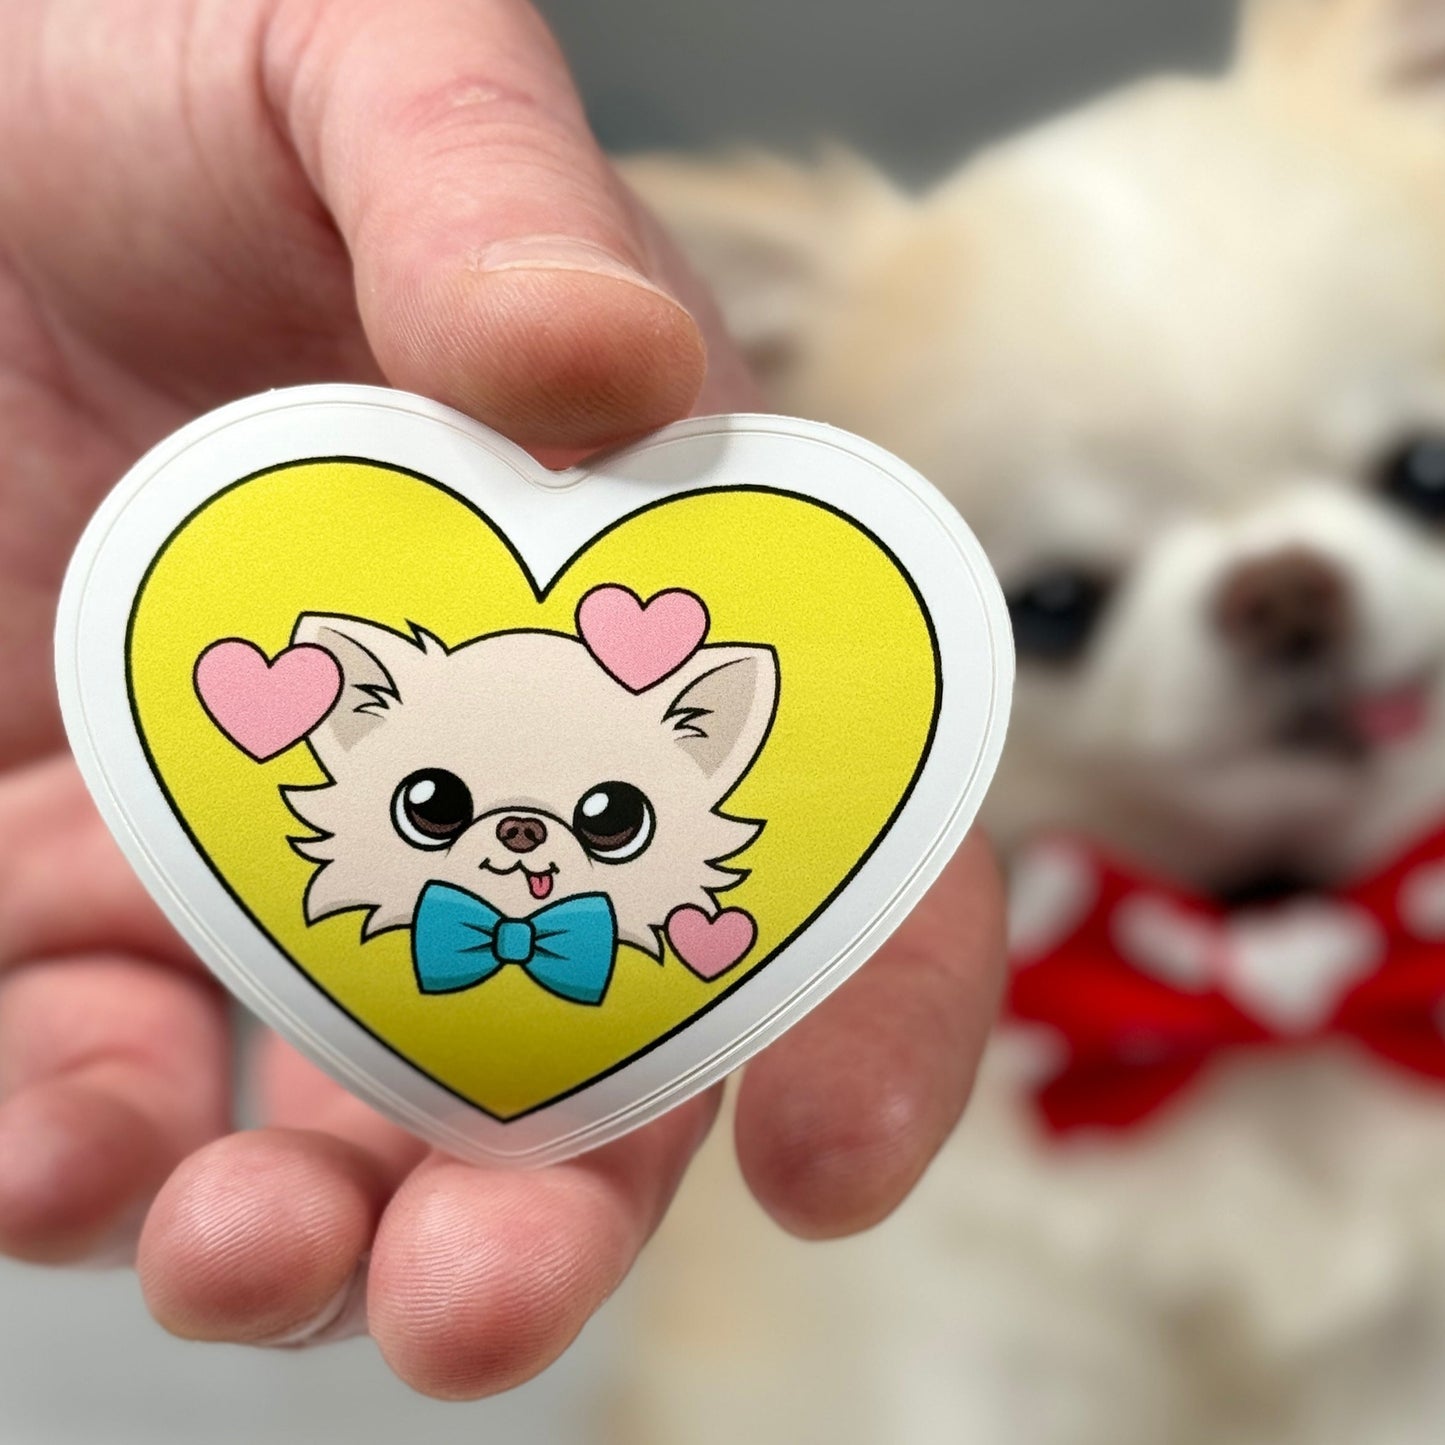 Close-up of Cedric's Cheerful Heart Sticker, prominently featuring a vibrant yellow heart surrounded by pink hearts, with a slightly out-of-focus Cedric in the background, symbolizing a joyful and loving atmosphere.